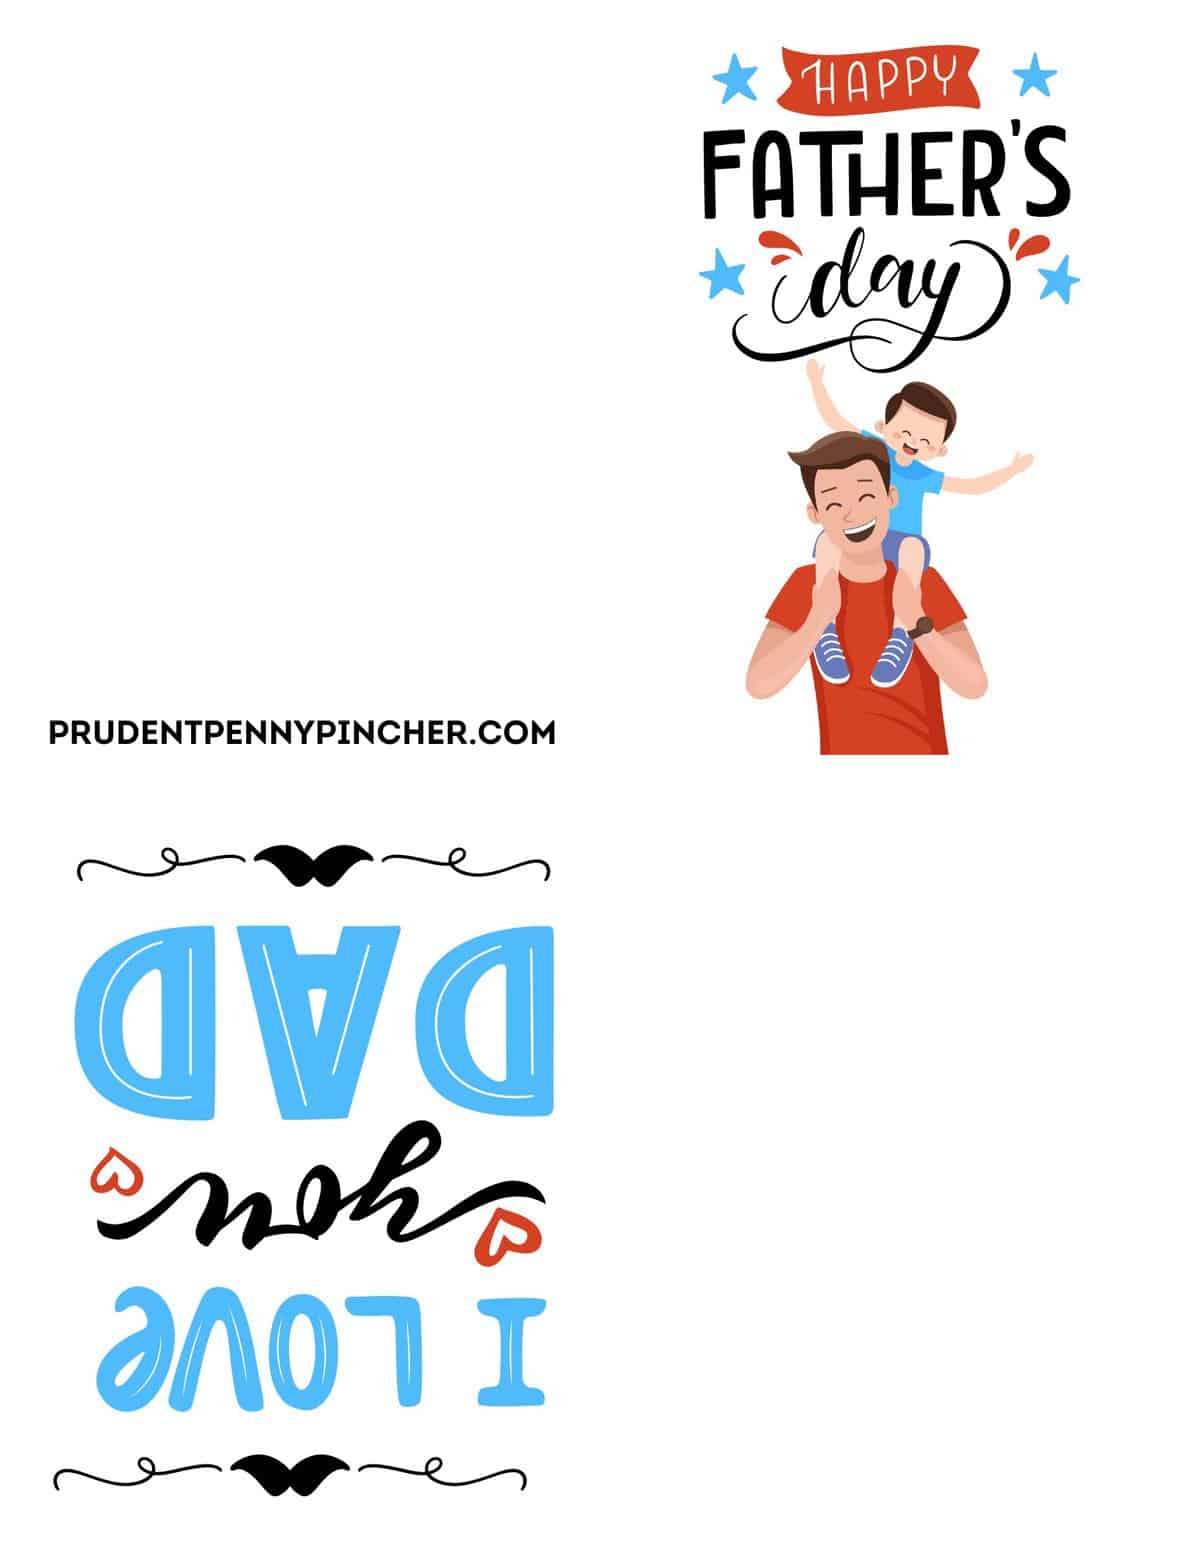 happy Father's Day card printable